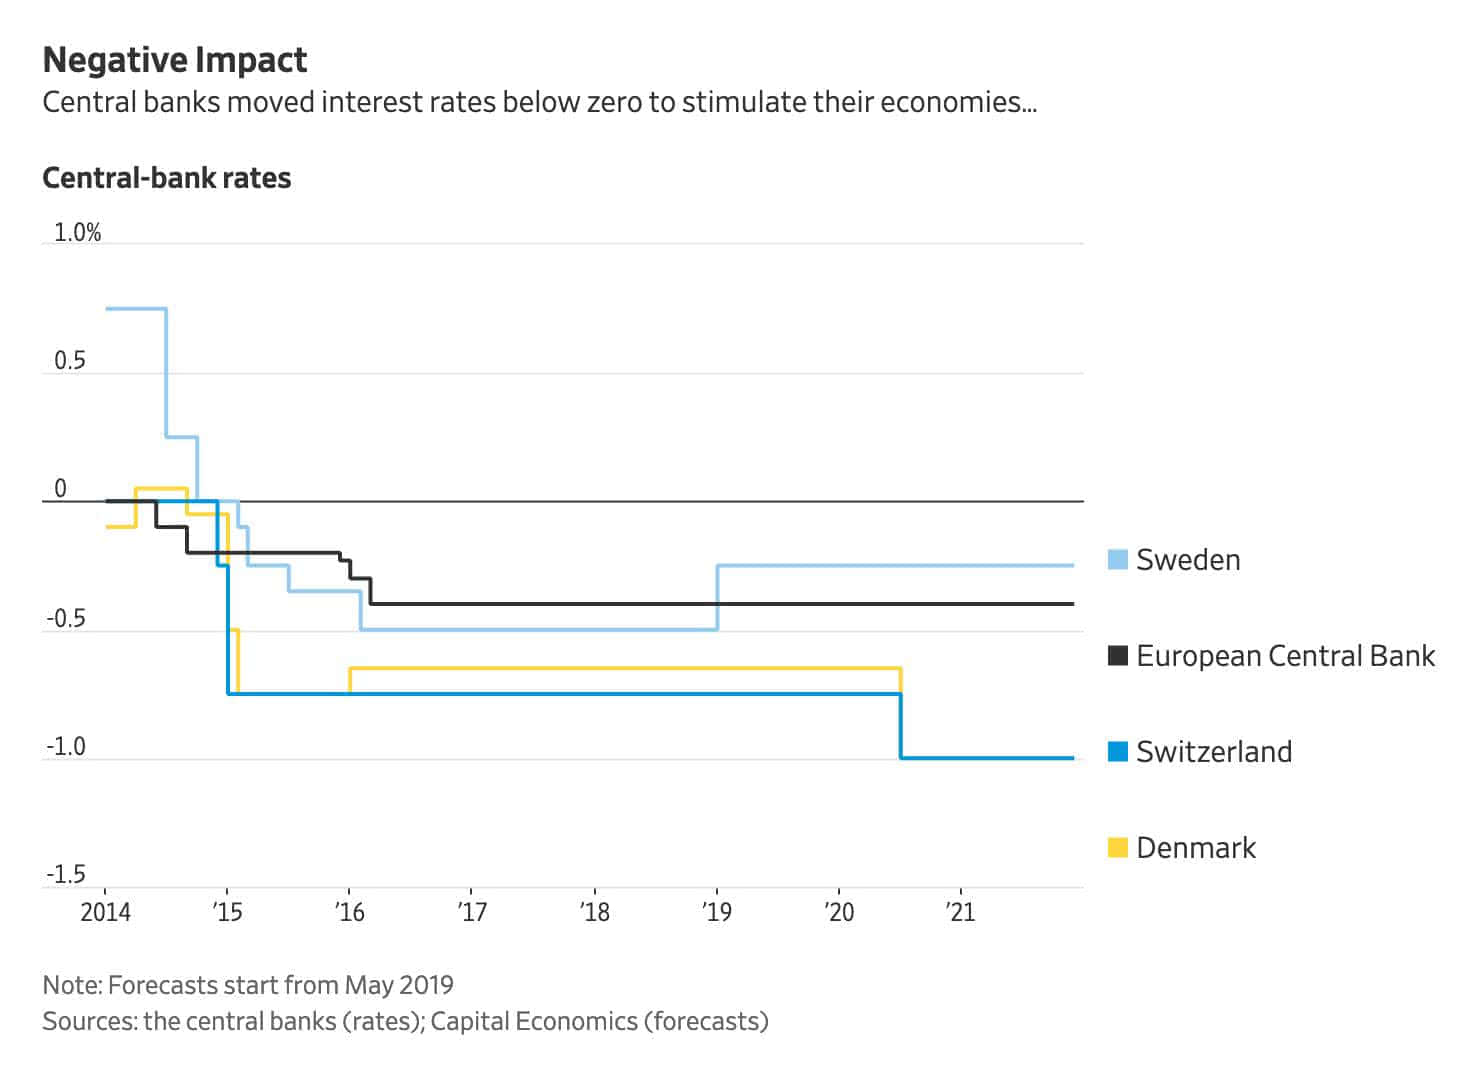 Central banks moved interest rates below zero to stimulate their economies